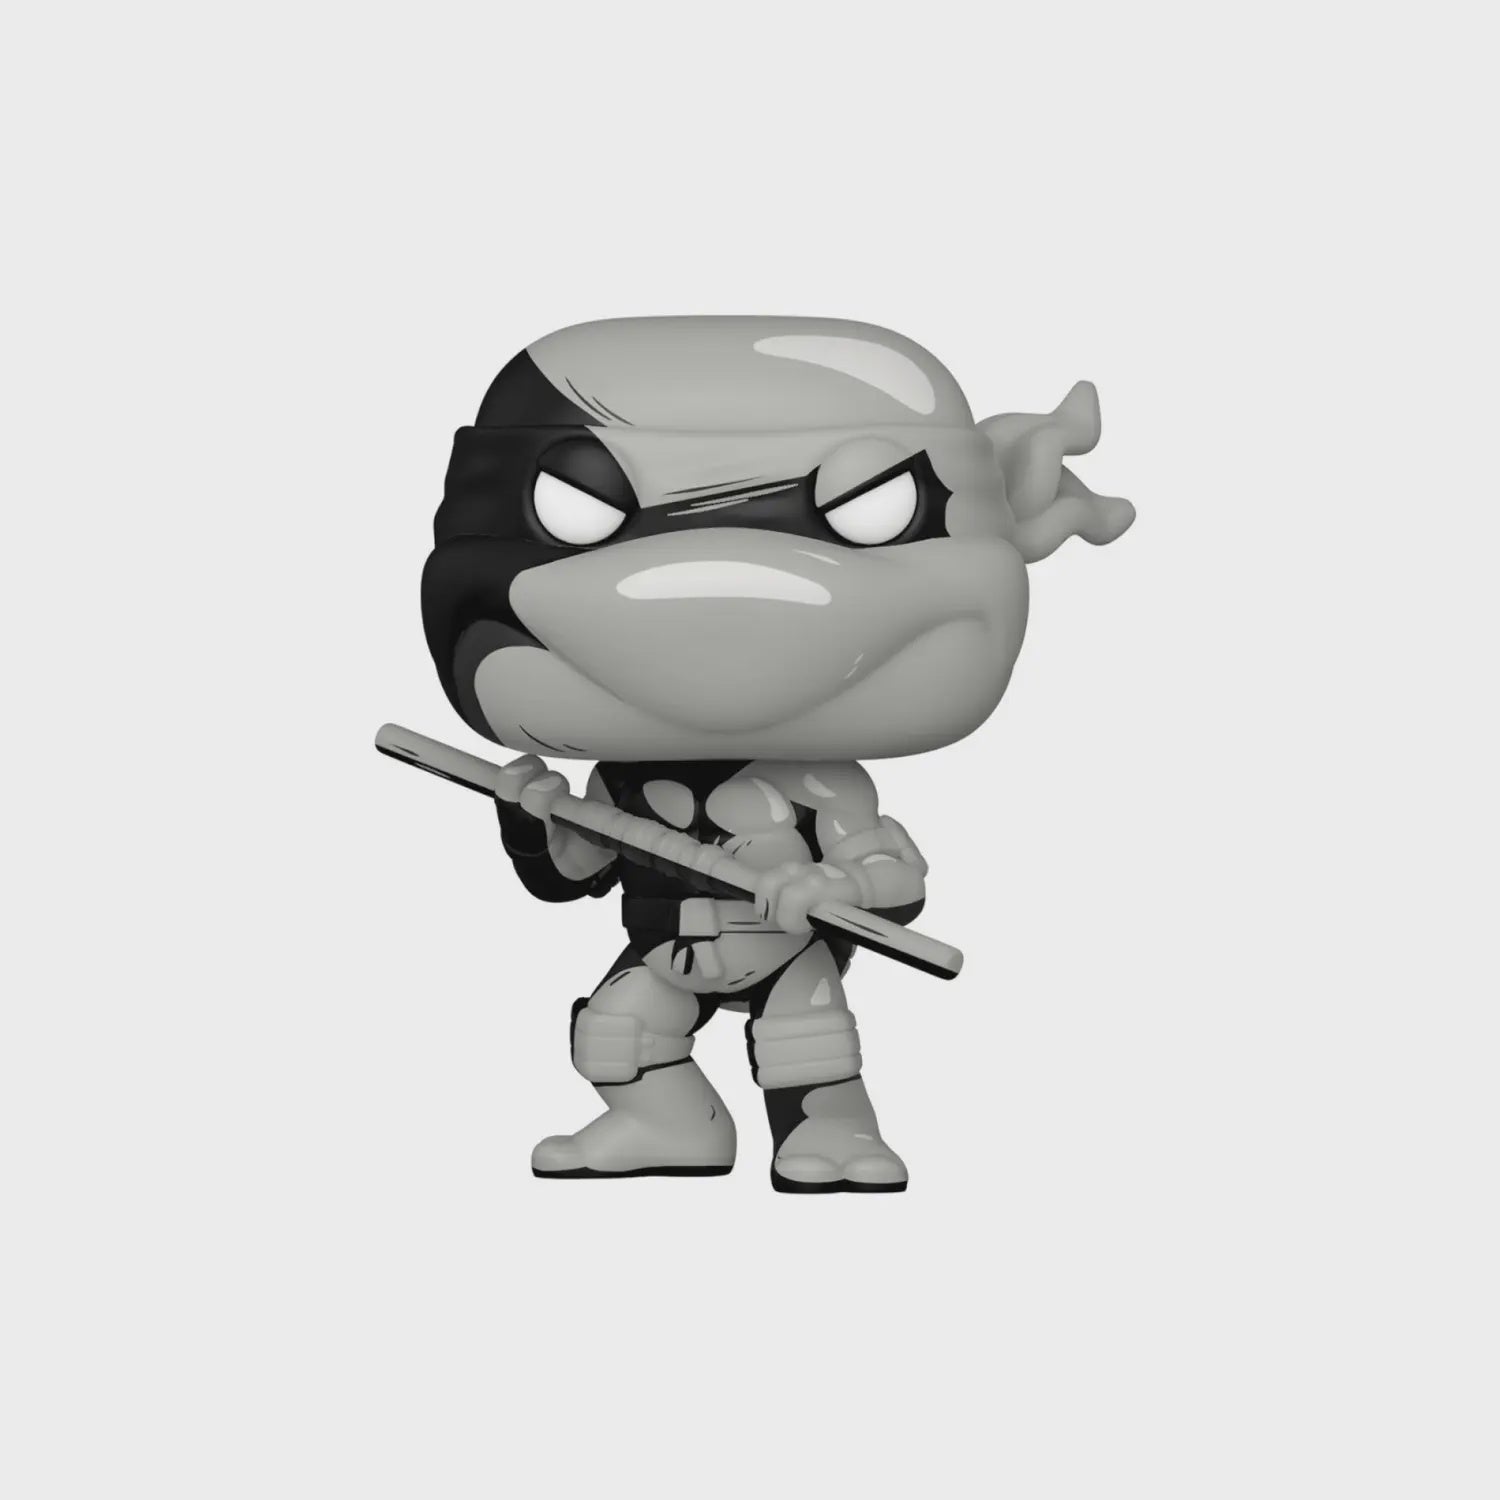 Funko POP! Comics: Eastman and Laird's Teenage Mutant Ninja Turtles - Donatello - #33 (PX Previews Exclusive) Vinyl Figure - Limited Edition B + W CHASE